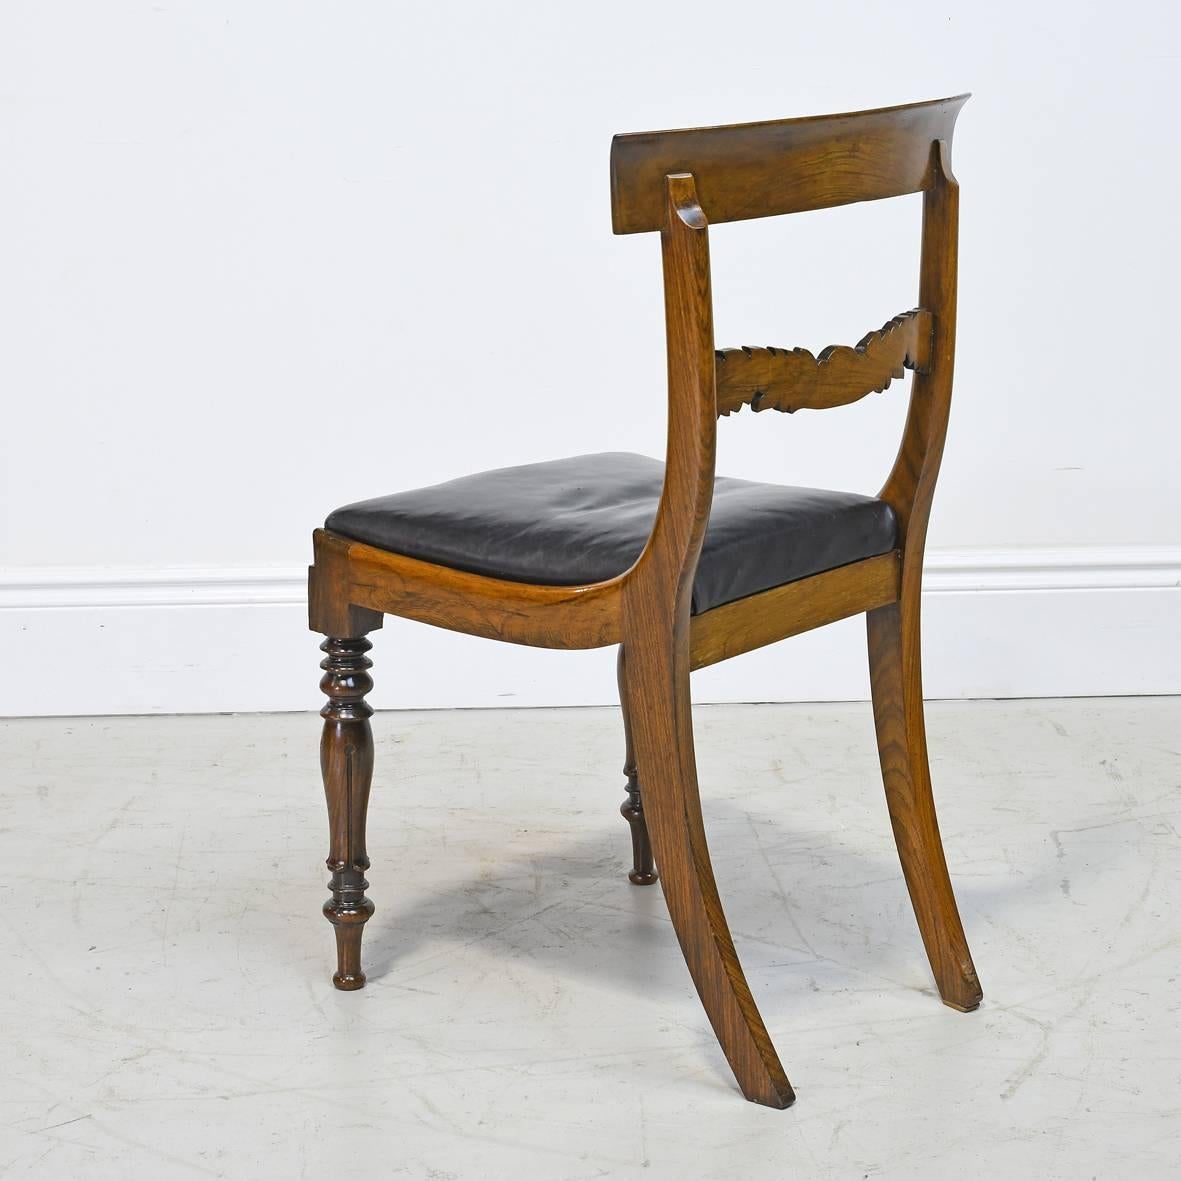 Carved English Regency Rosewood Chair with Black Leather Upholstery, circa 1830